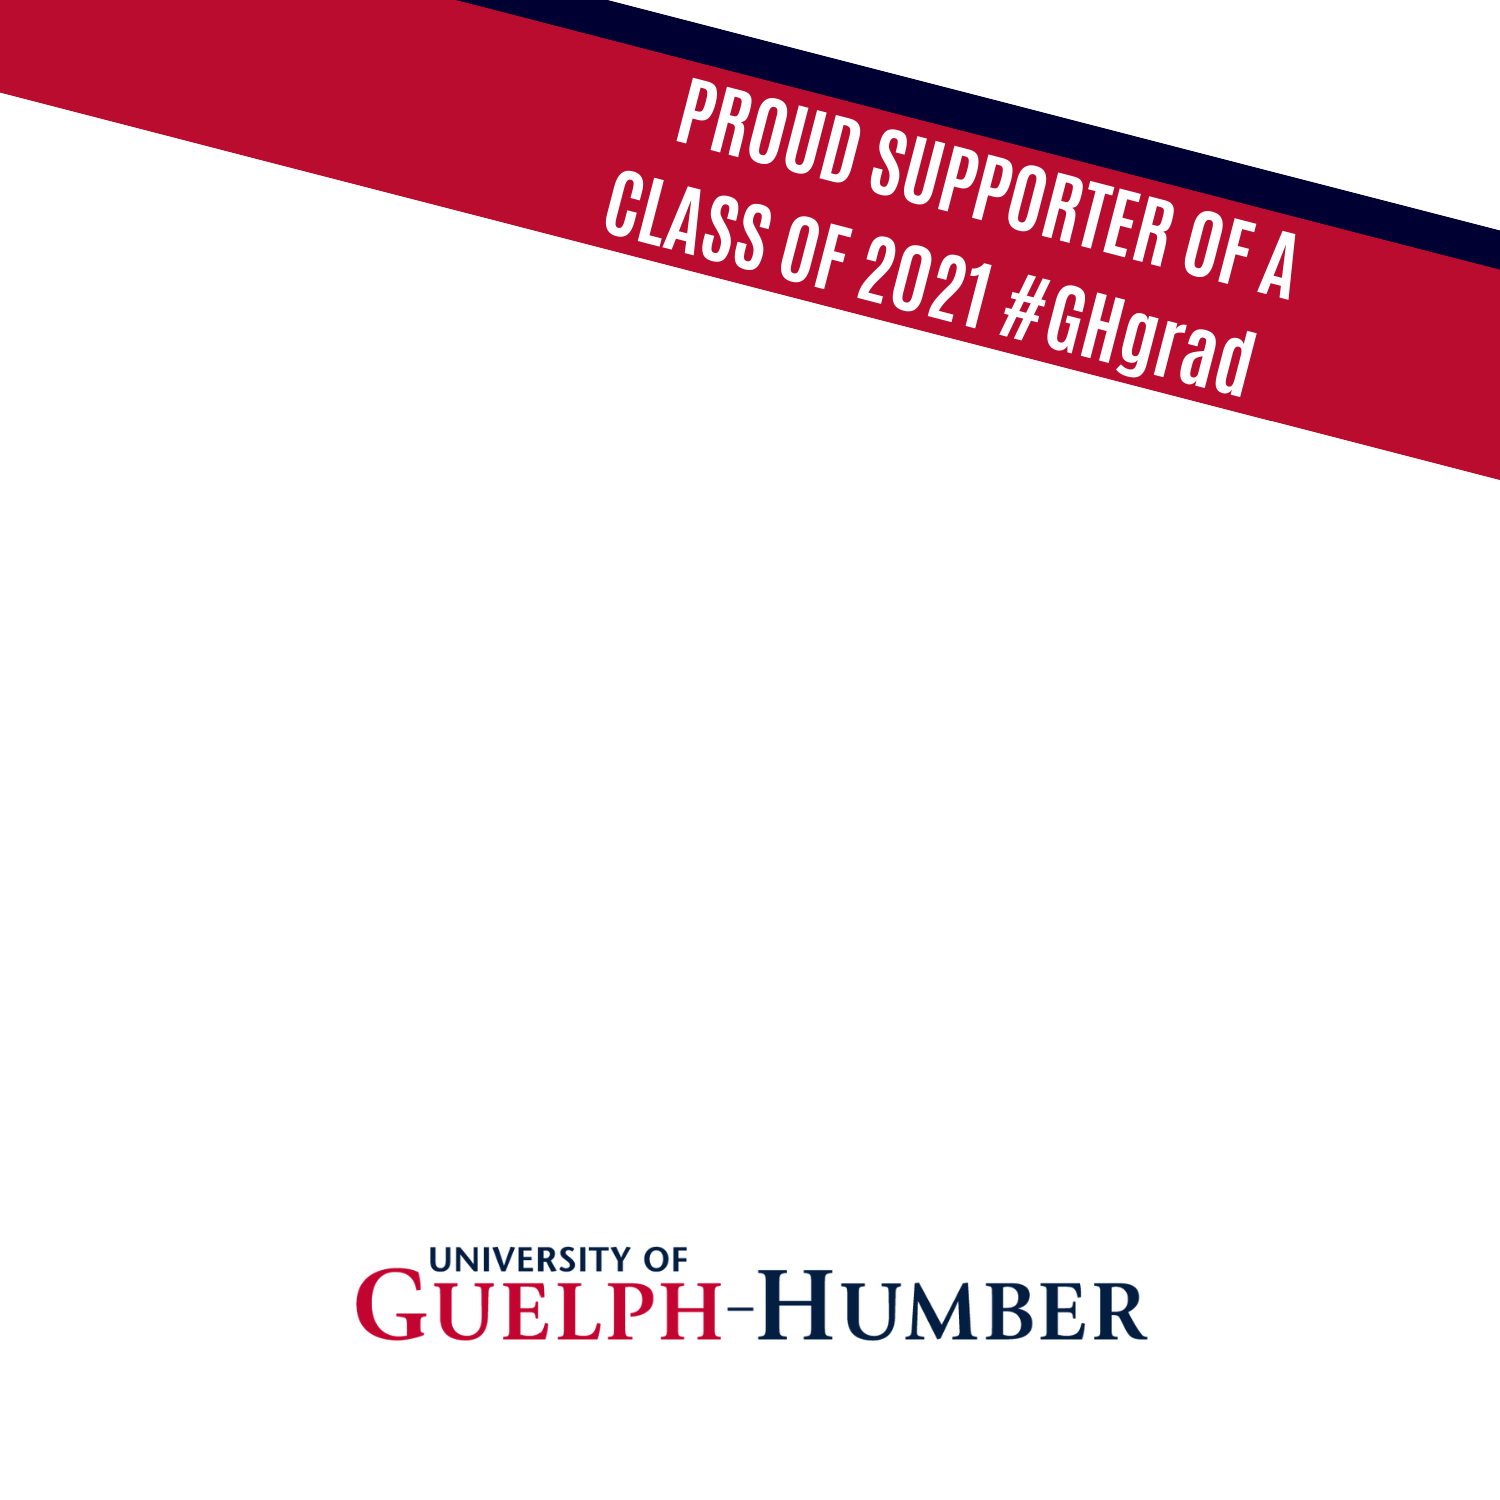 Use Facebook profile frame: Proud Supporter of a Class of 2021 #GHgrad